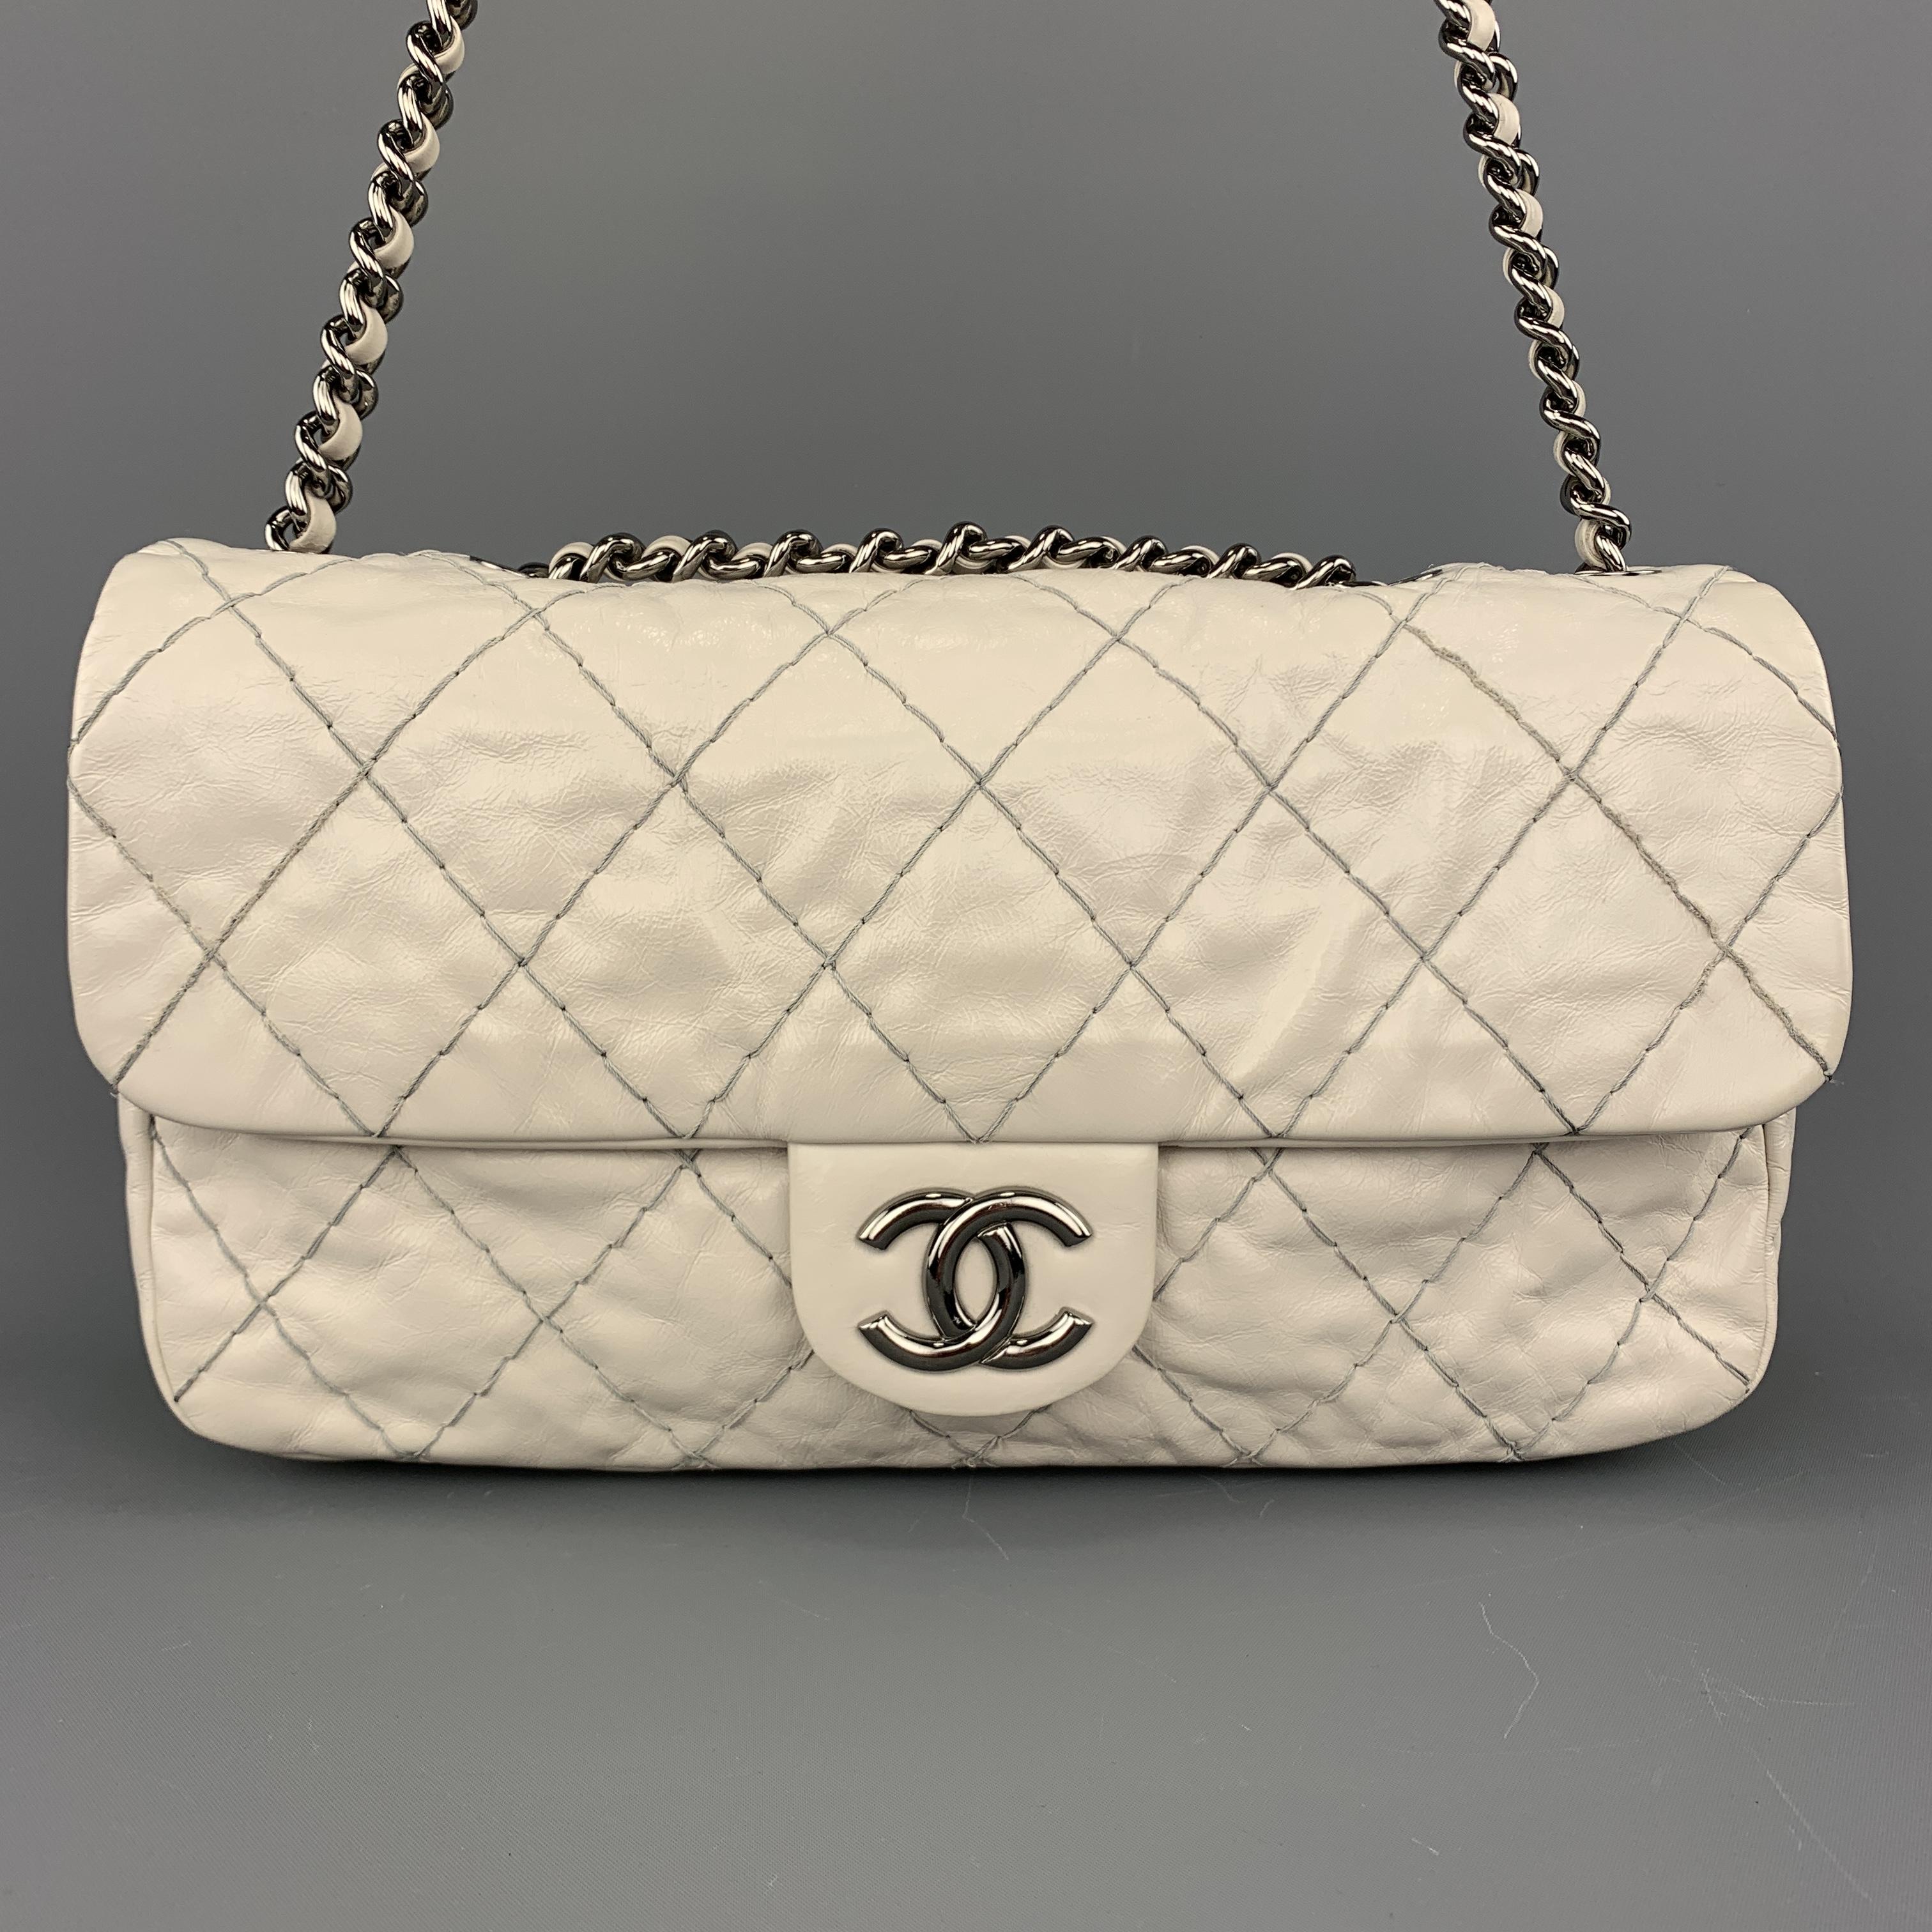 This rare CHANEL medium shoulder bag comes in creamy beige leather with all over thick top stitch pattern, top snap flap with dark silver tone CC emblem, double woven chain strap, and twill liner with zip pocket. Minor discoloration throughout